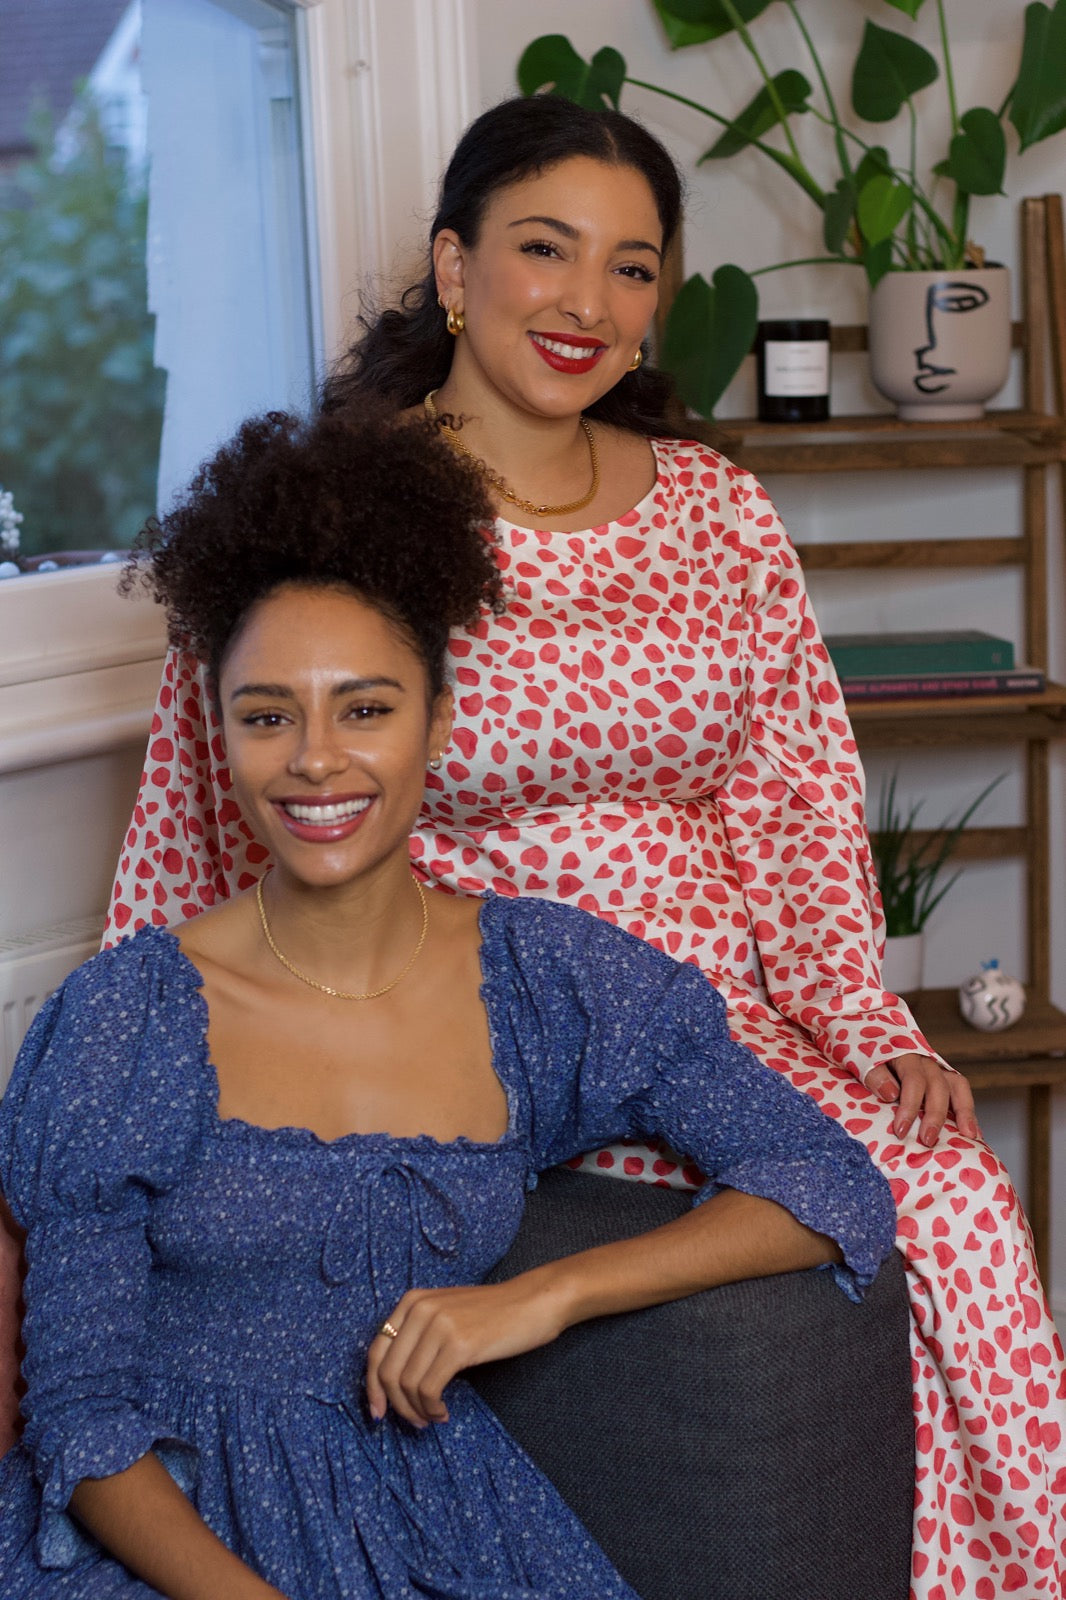 Founders of Sustainably Influenced, Charlotte Williams and Bianca Foley, sit together smiling at the camera. Charlotte wears a blue square neck dress, and Bianca wears a red and white print dress.